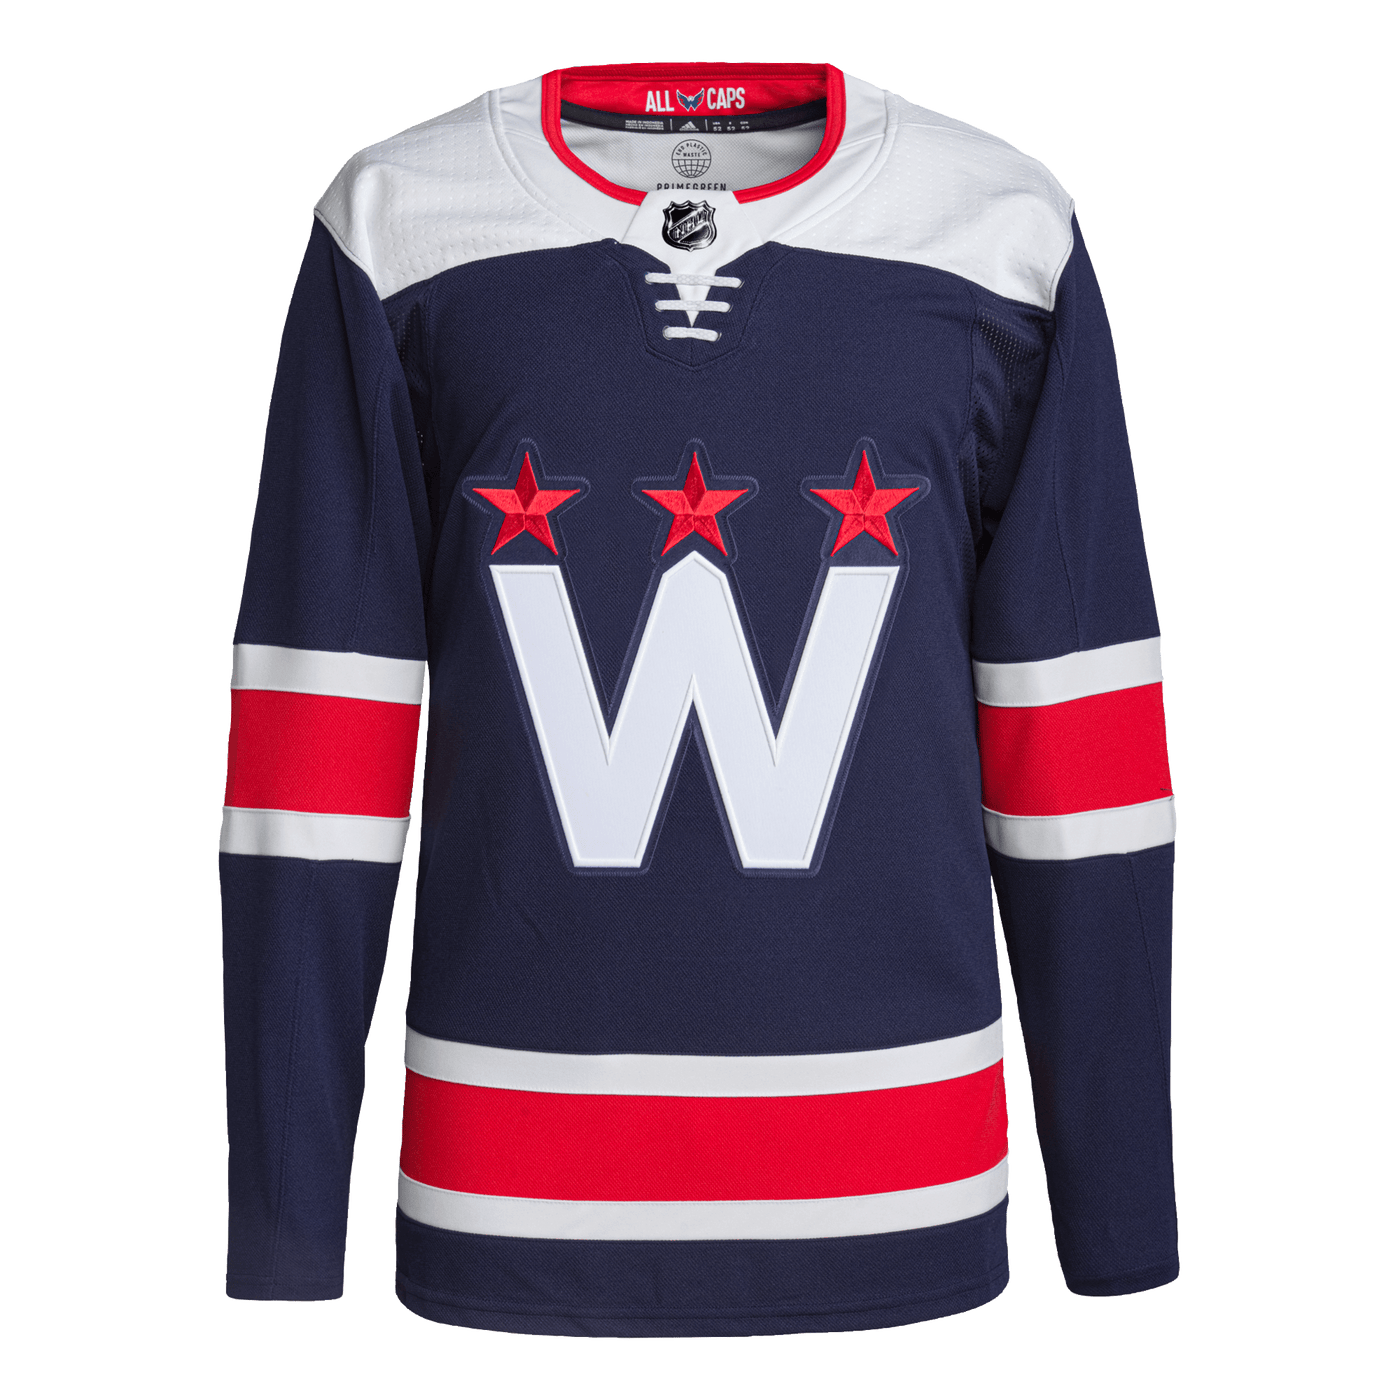 Capitals release new third jerseys featuring updated crest from